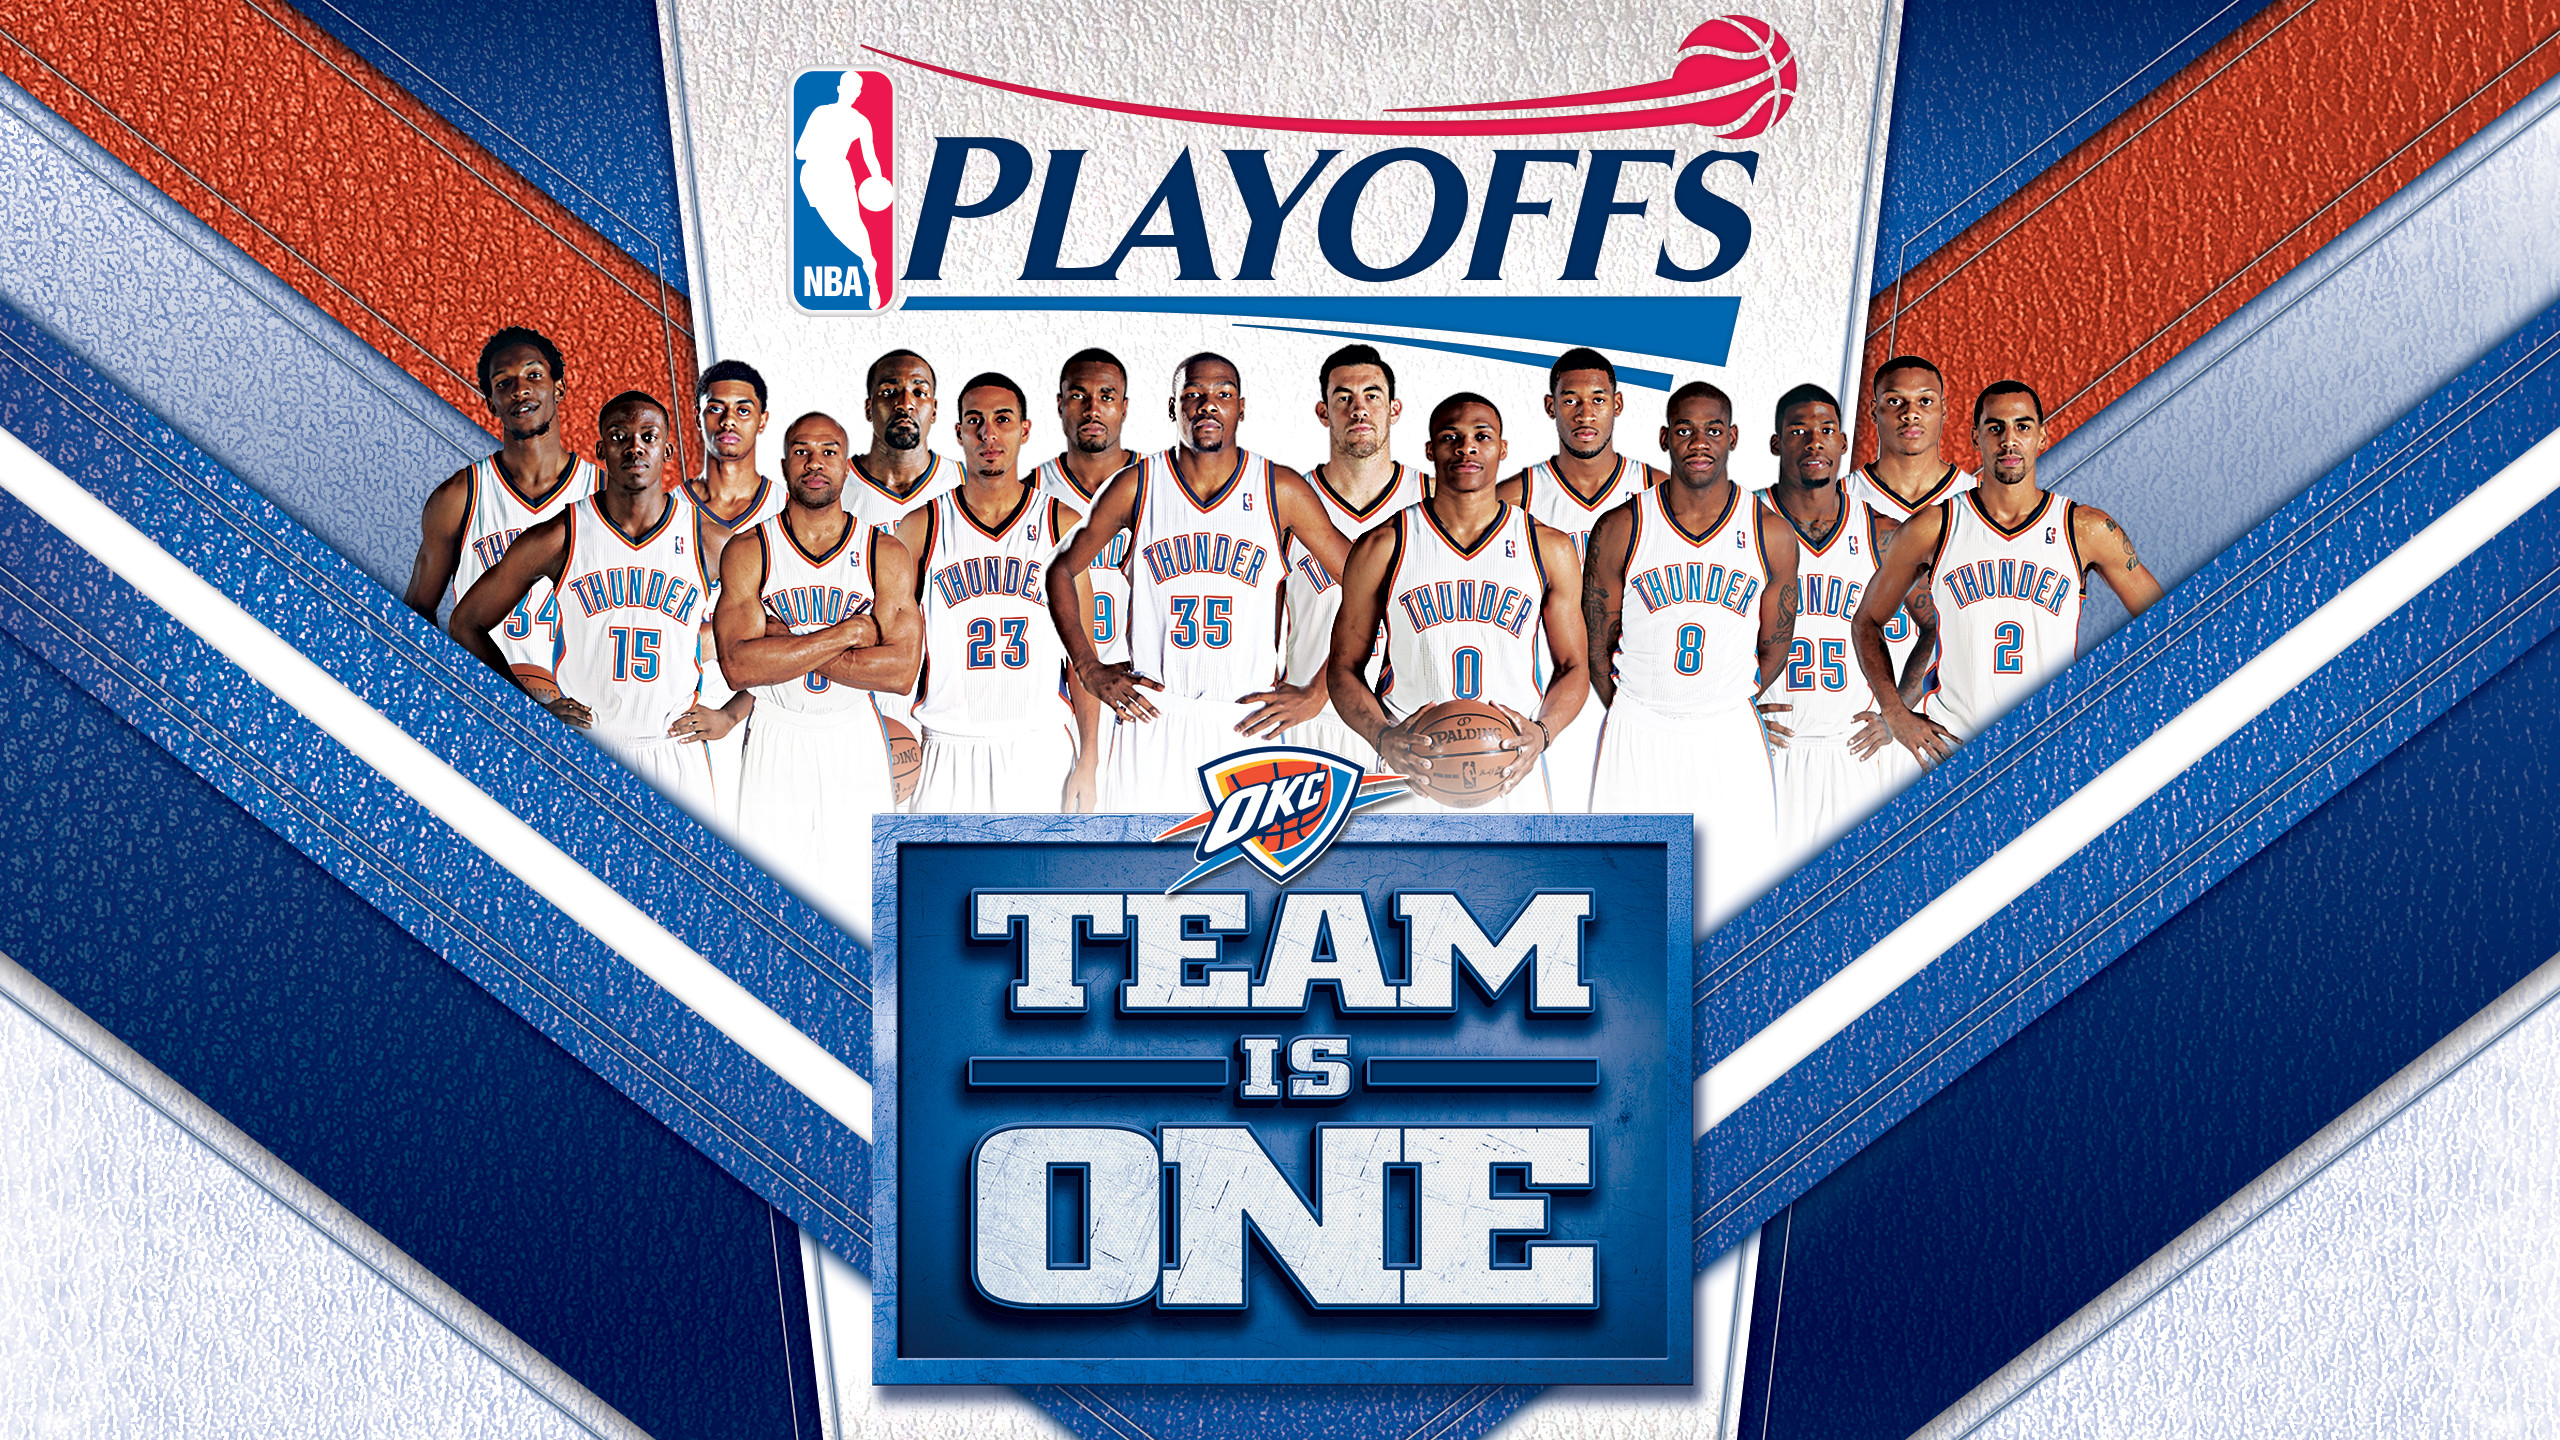 Adorable Oklahoma City Thunder Photos And Pictures, - Nba Playoffs 2011 - HD Wallpaper 